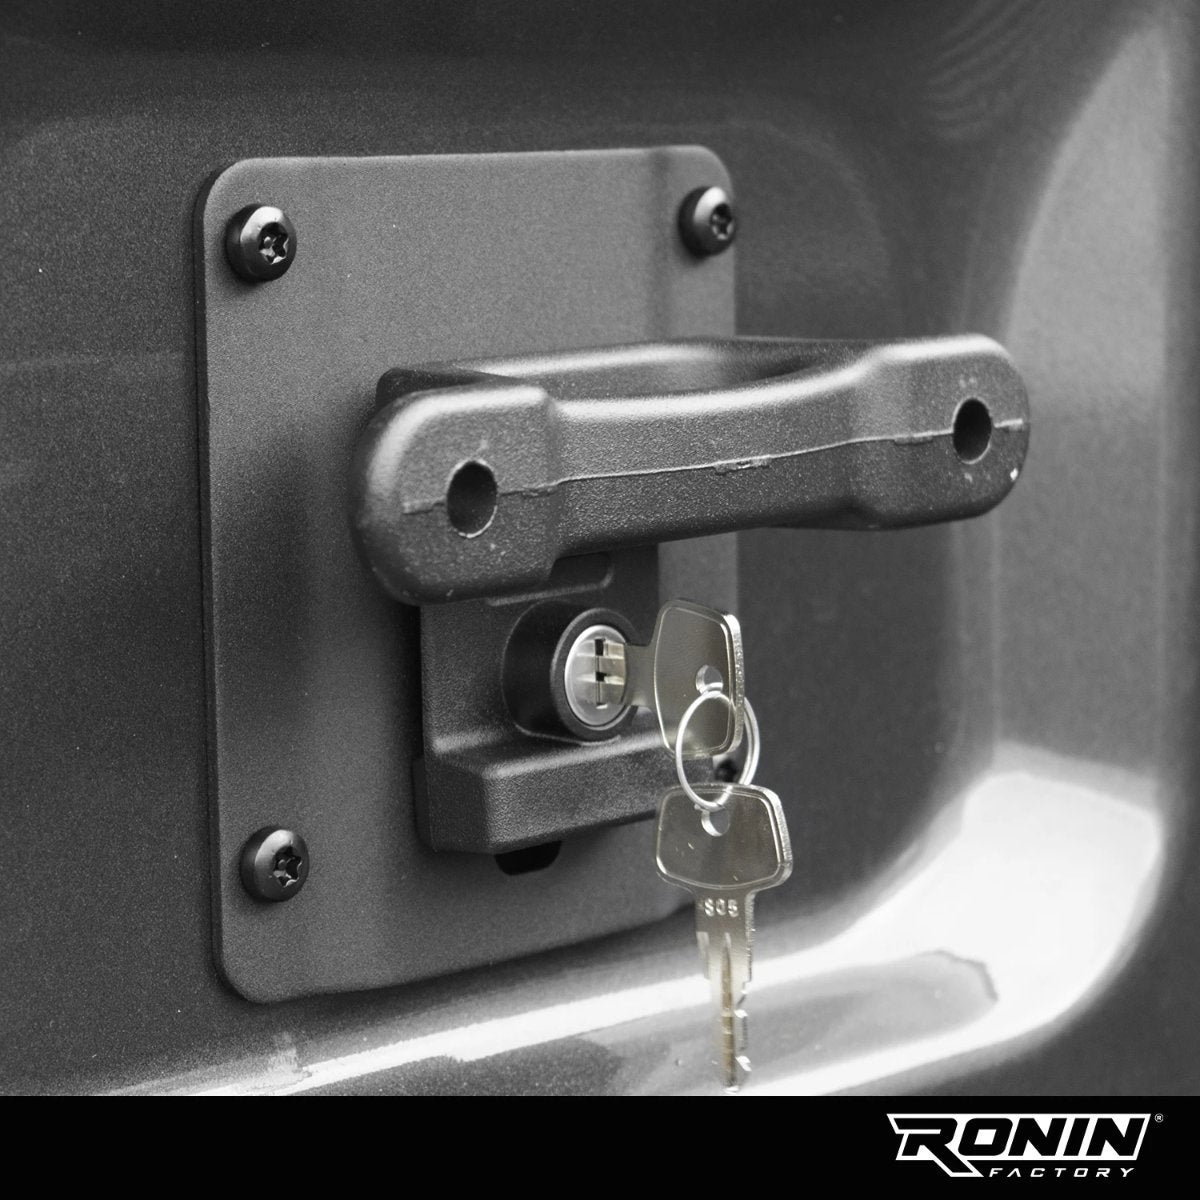 FORD_F150_Raptor_Bed_Tie_Down_Bracket_Ronin_Factory_with_cleat_with_Logo_1800x1800.jpg